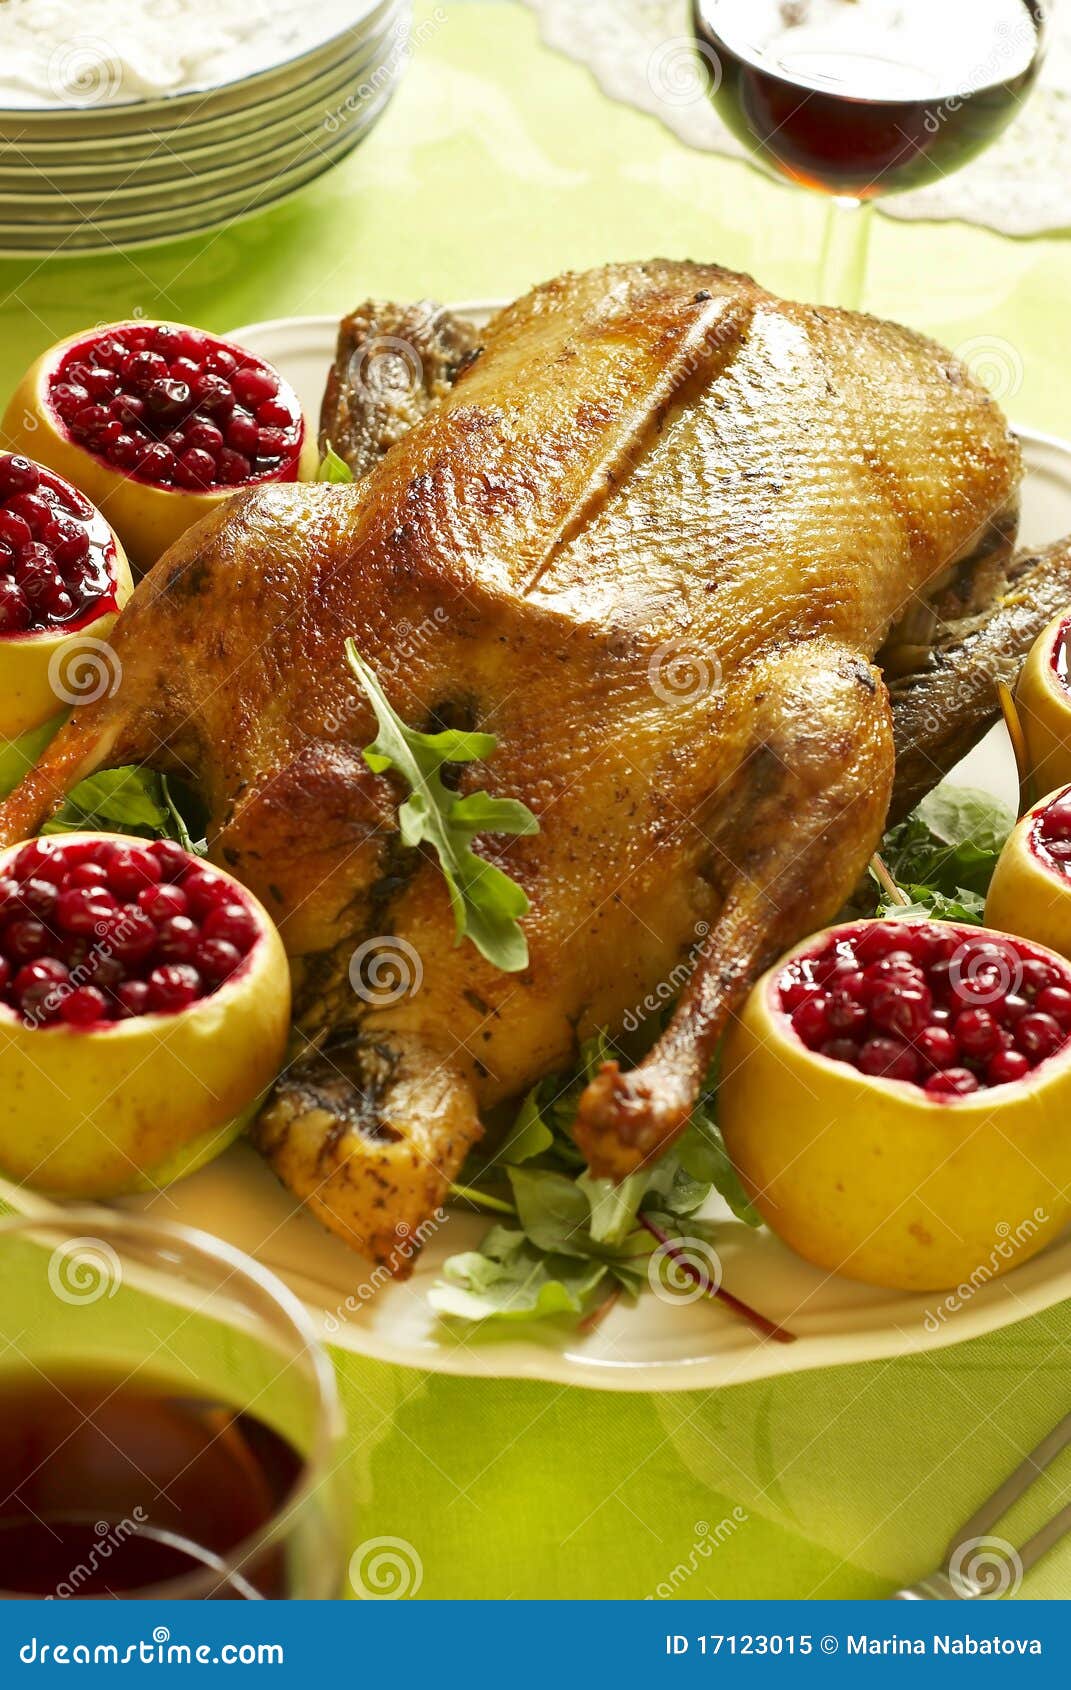 Christmas roast goose stock image. Image of delicious - 17123015